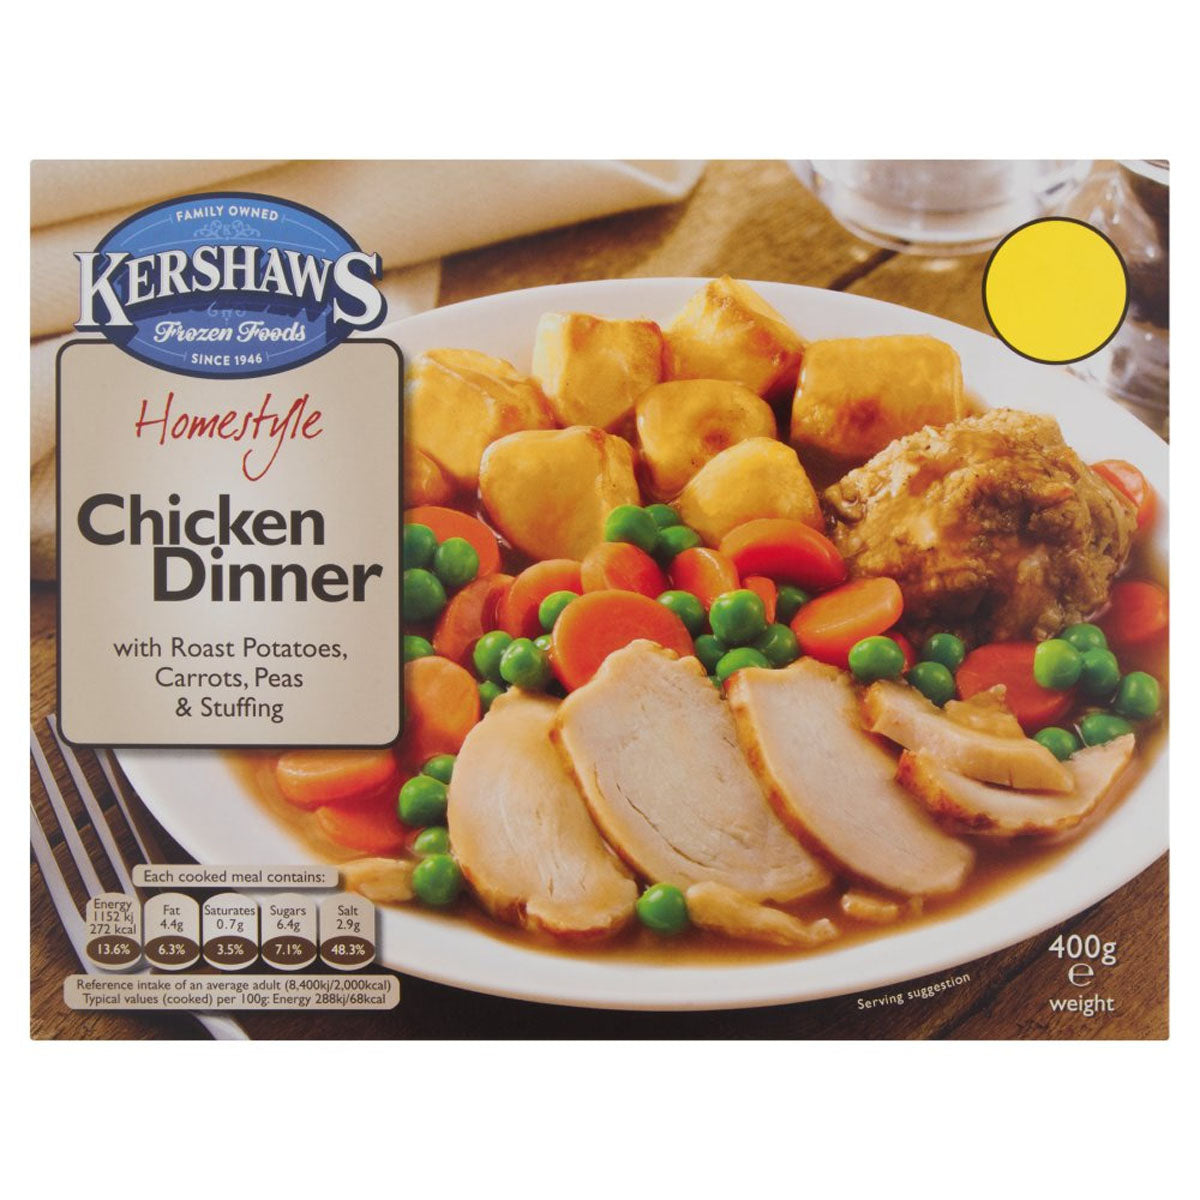 Kershaws - Homestyle Chicken Dinner with Roast Potatoes, Carrots, Peas & Stuffing - 400g